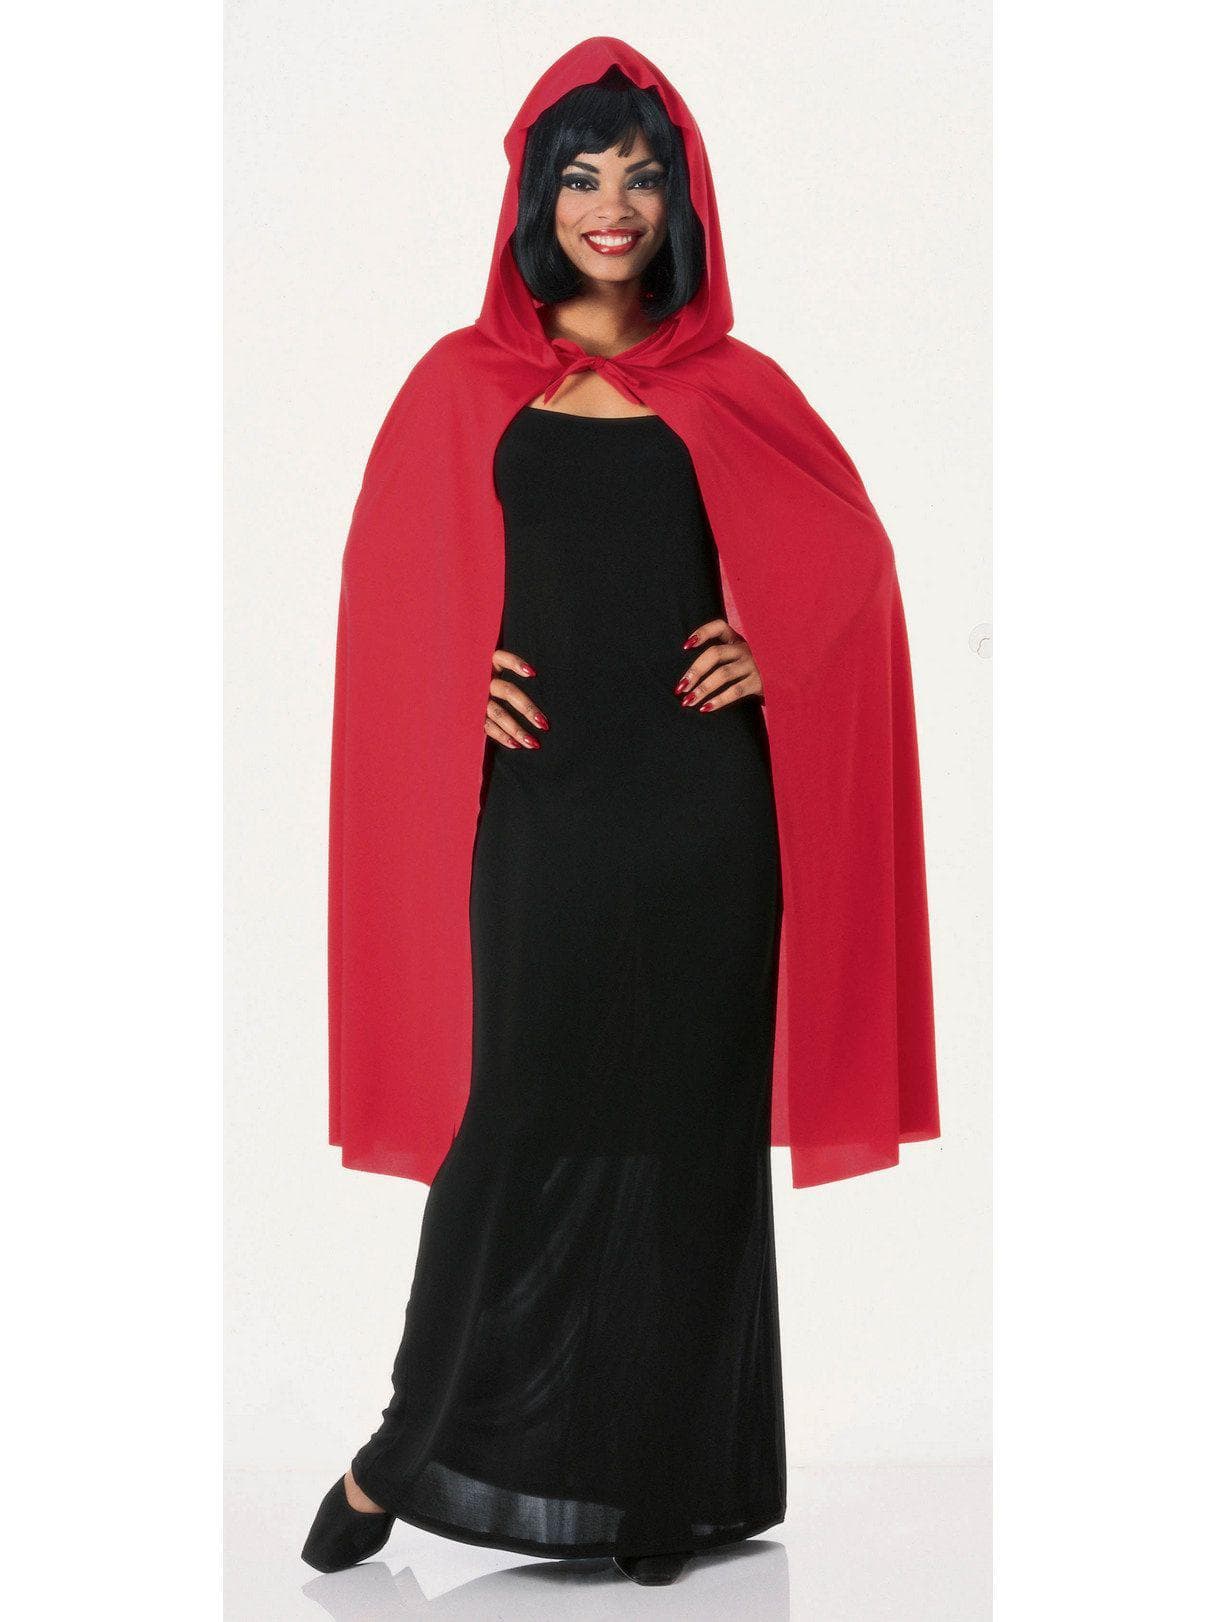 Adult Short Red Hooded Cape - costumes.com